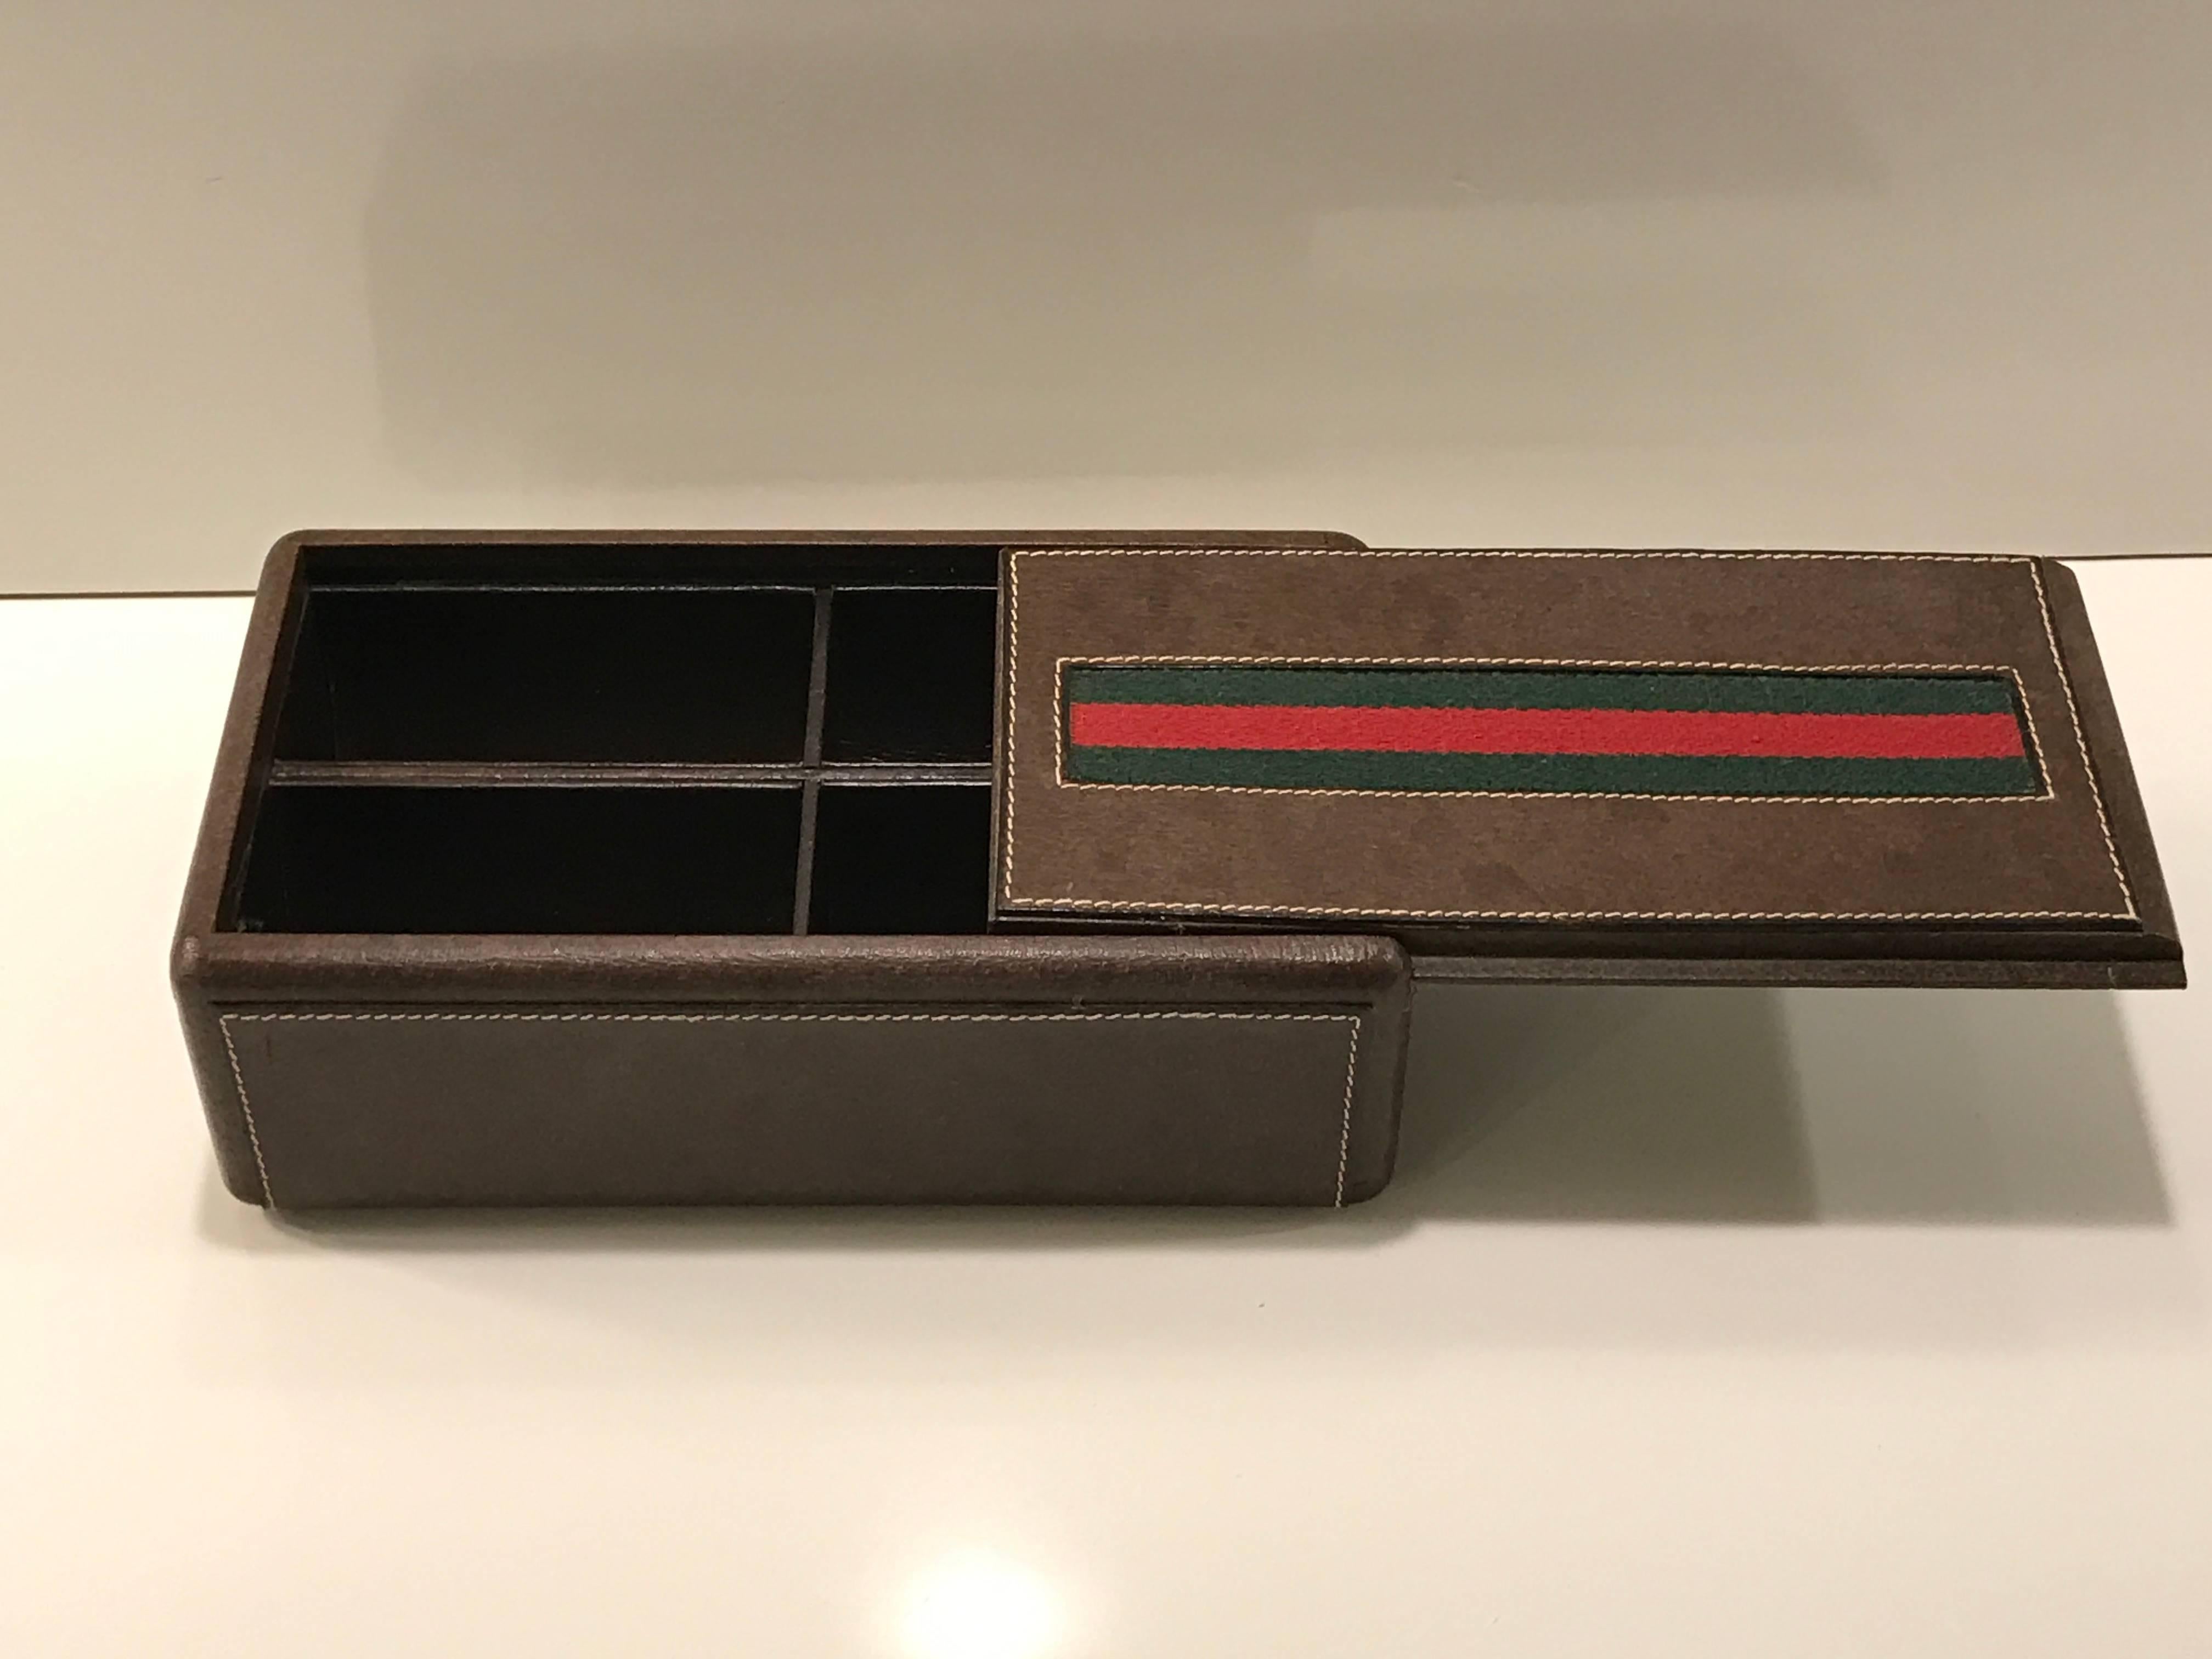 Gucci leather mens jewelry or watch box with divided interior, of rectangular form with inset signature green and red stripe logo, on a stitched calfskin box. The sliding lid reveals four (4" x 1 3/4" W x 2" D) rounded compartments